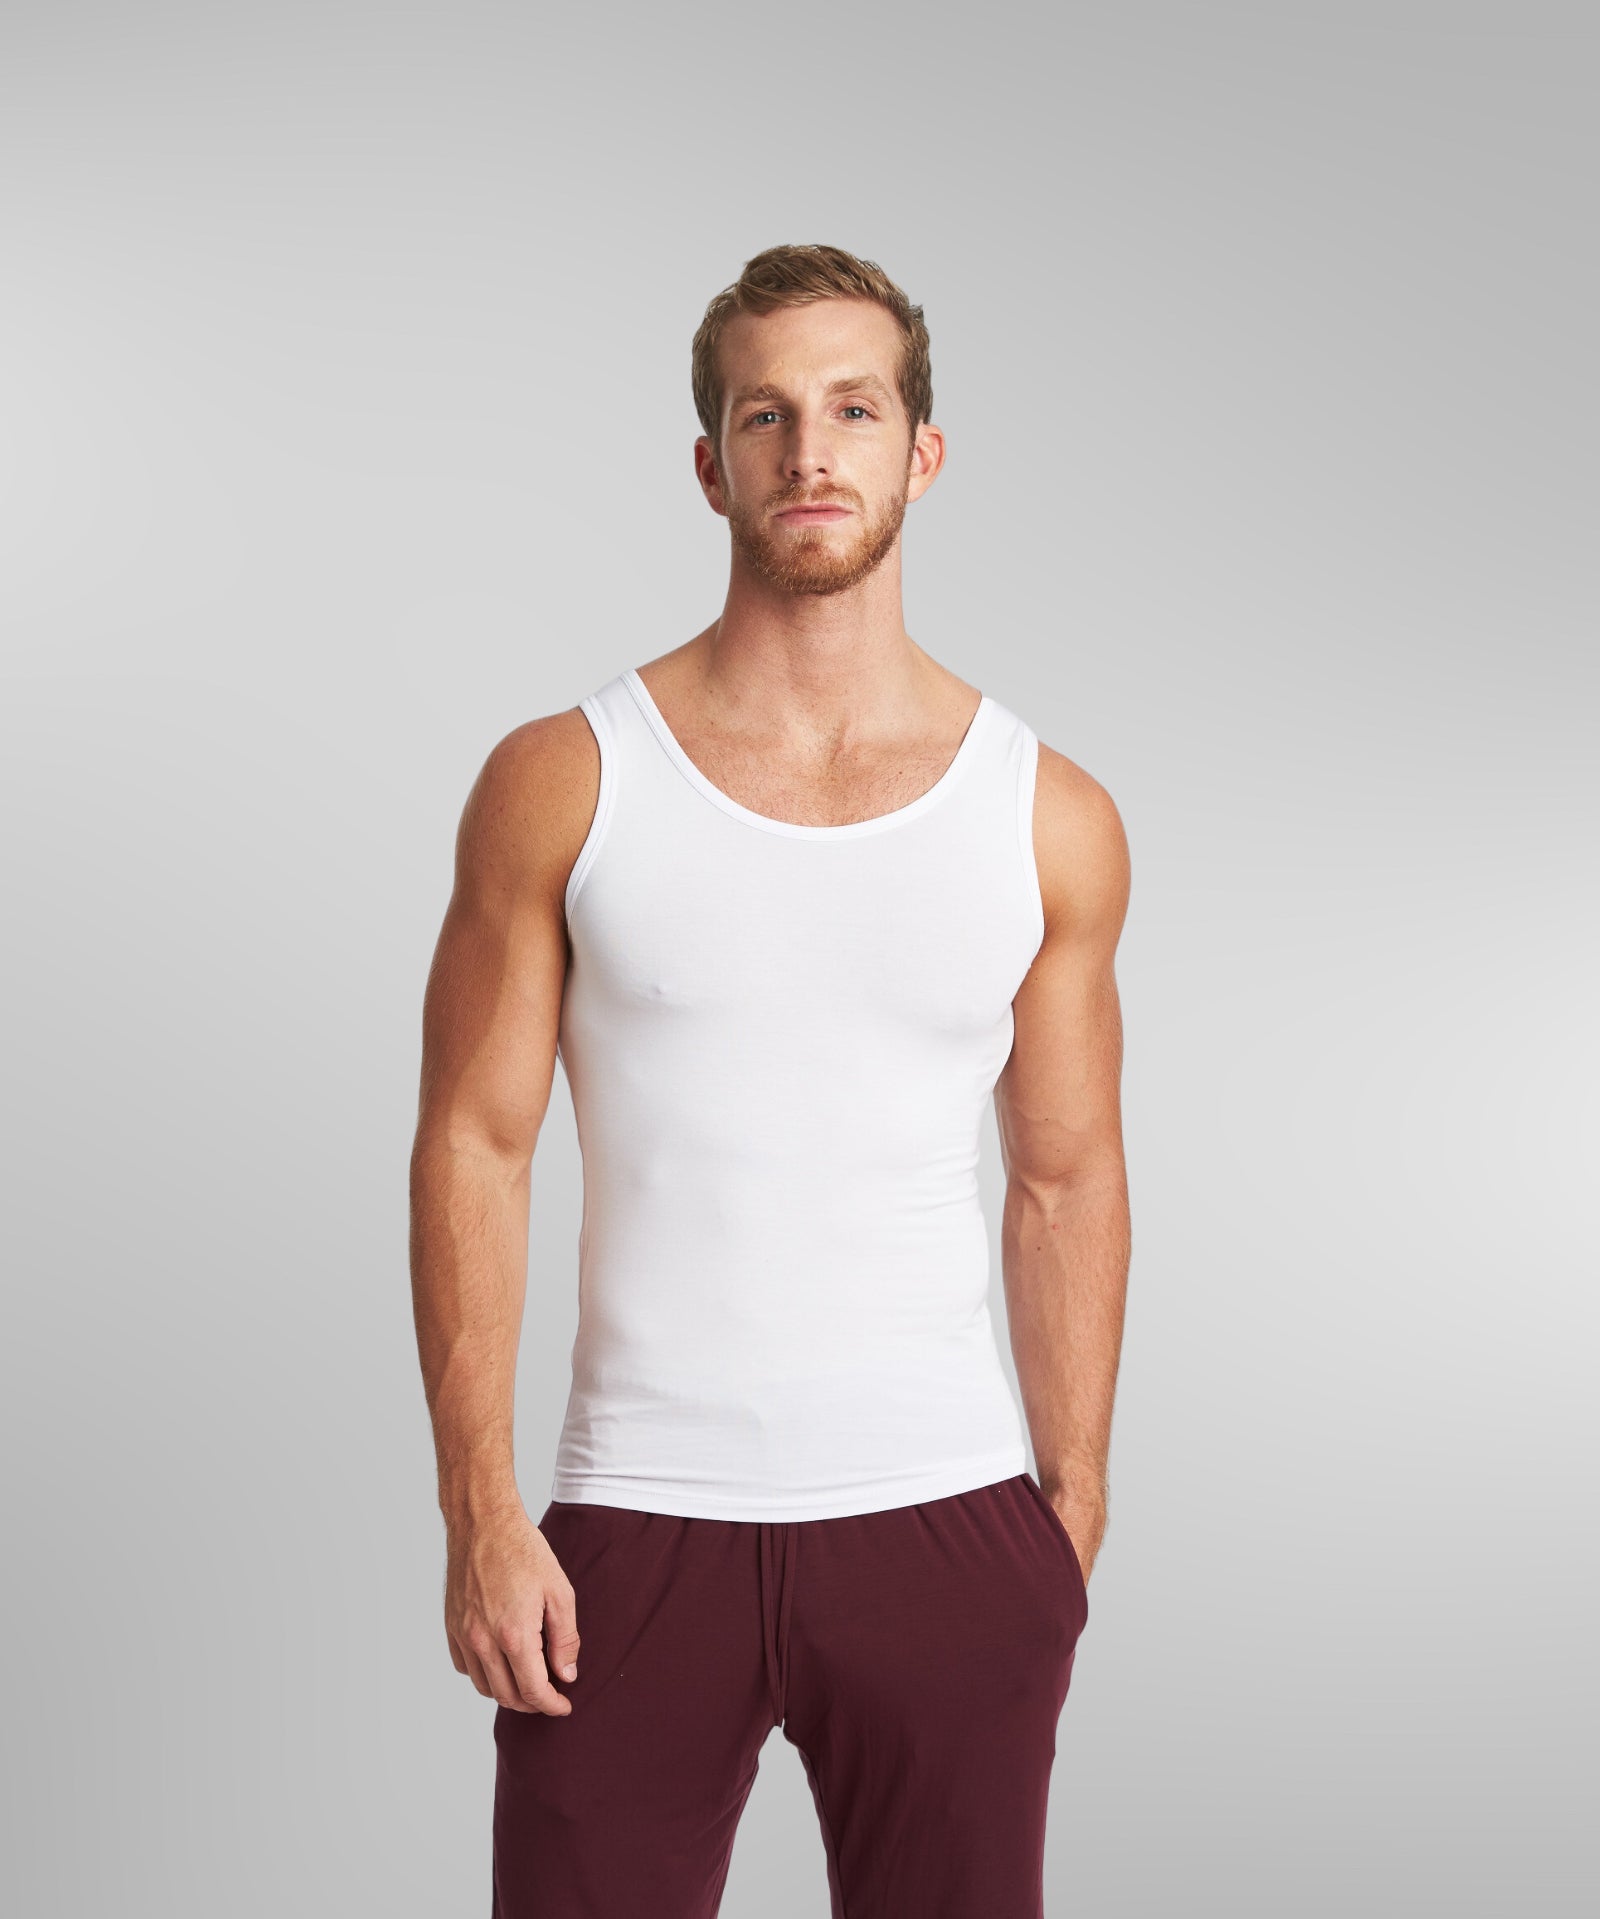 mean wearing a round neck white tank top